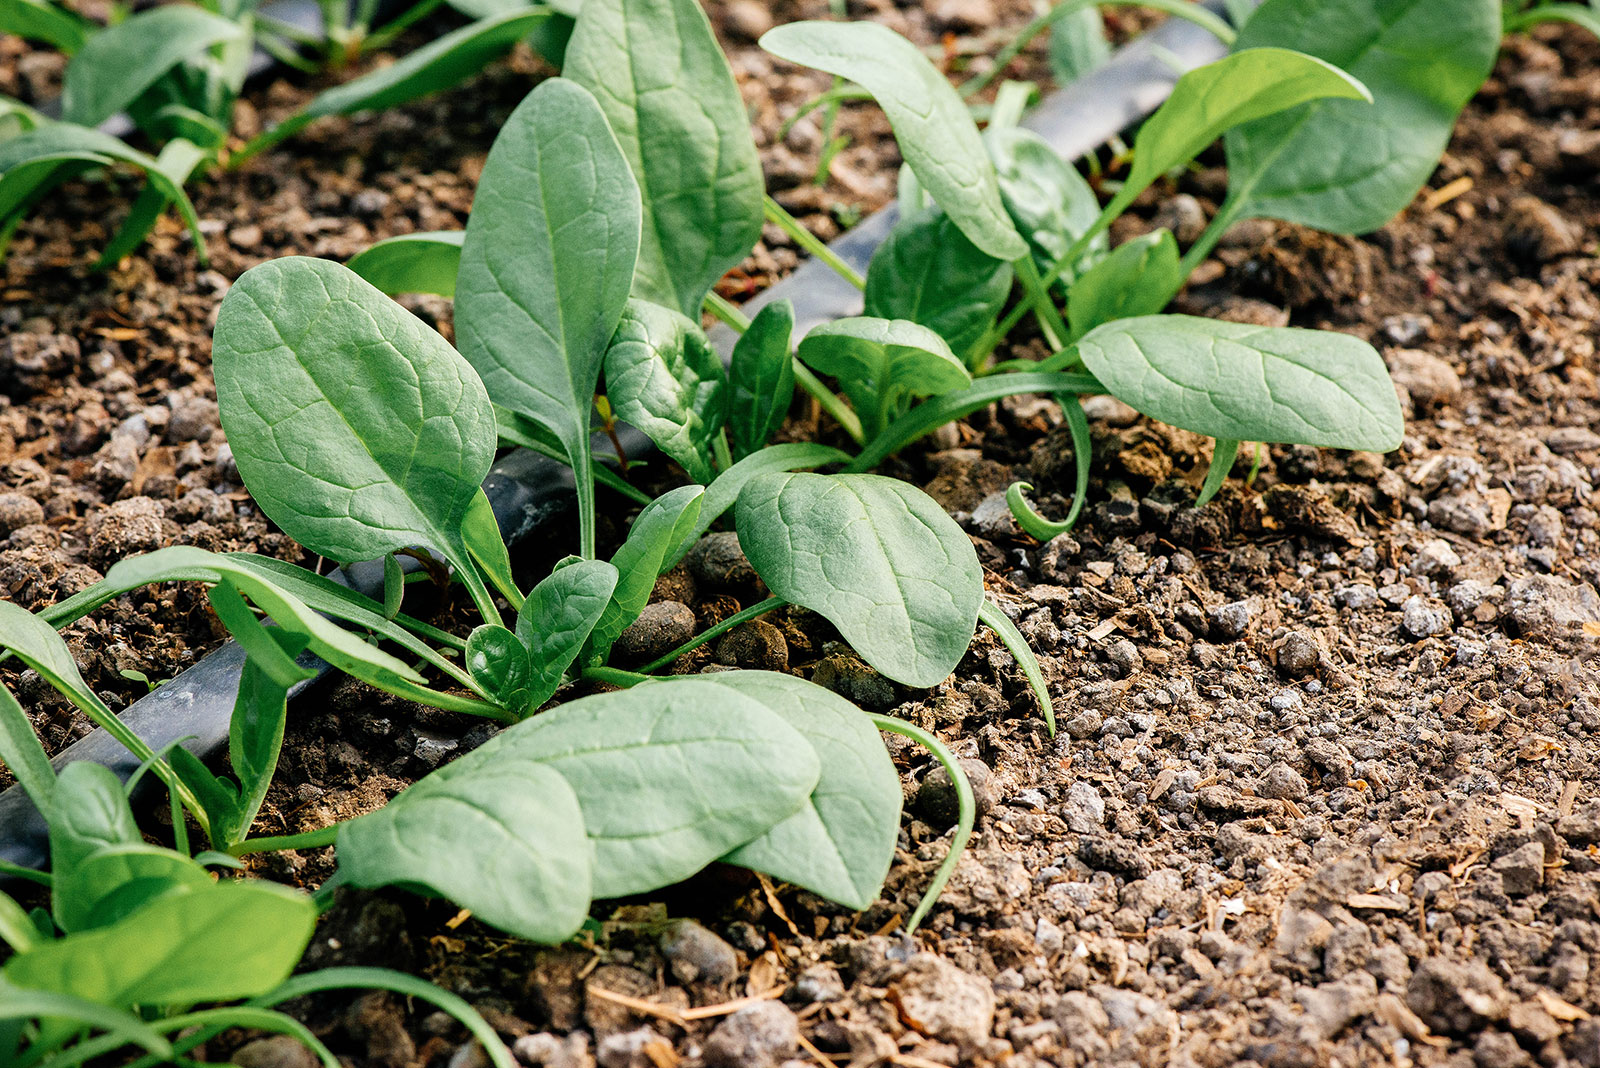 Young spinach plants growing in a garden with drip tape irrigation